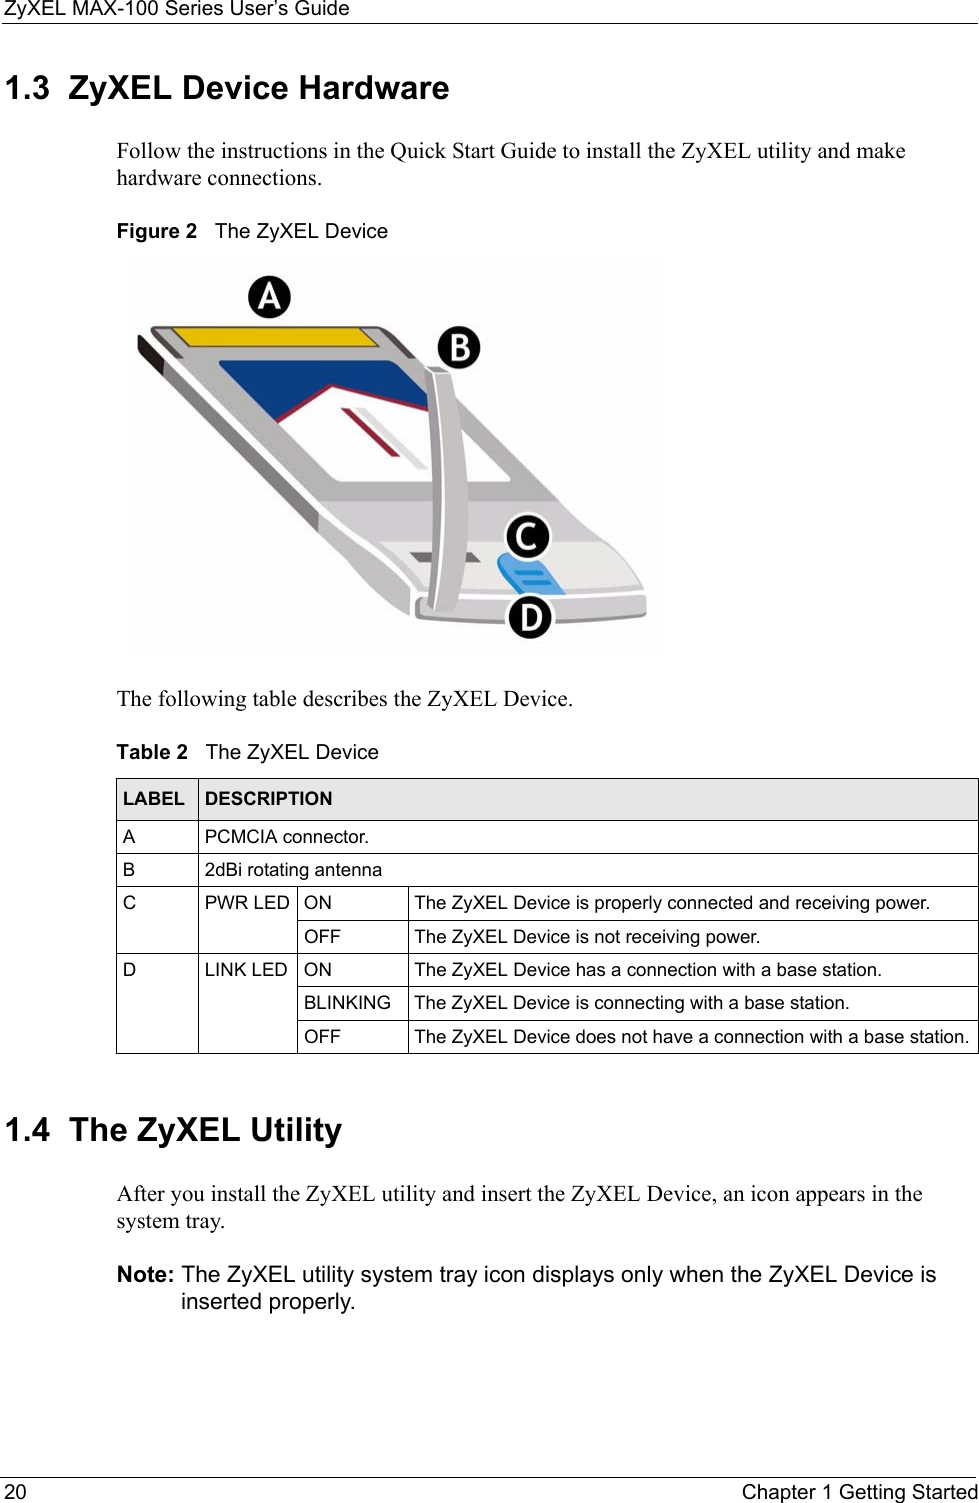 ZyXEL MAX-100 Series User’s Guide20 Chapter 1 Getting Started1.3  ZyXEL Device HardwareFollow the instructions in the Quick Start Guide to install the ZyXEL utility and make hardware connections.Figure 2   The ZyXEL DeviceThe following table describes the ZyXEL Device.1.4  The ZyXEL UtilityAfter you install the ZyXEL utility and insert the ZyXEL Device, an icon appears in the system tray.Note: The ZyXEL utility system tray icon displays only when the ZyXEL Device is inserted properly.Table 2   The ZyXEL DeviceLABEL DESCRIPTIONA PCMCIA connector.B 2dBi rotating antennaC PWR LED ON The ZyXEL Device is properly connected and receiving power.OFF The ZyXEL Device is not receiving power.D LINK LED ON The ZyXEL Device has a connection with a base station.BLINKING The ZyXEL Device is connecting with a base station.OFF The ZyXEL Device does not have a connection with a base station.